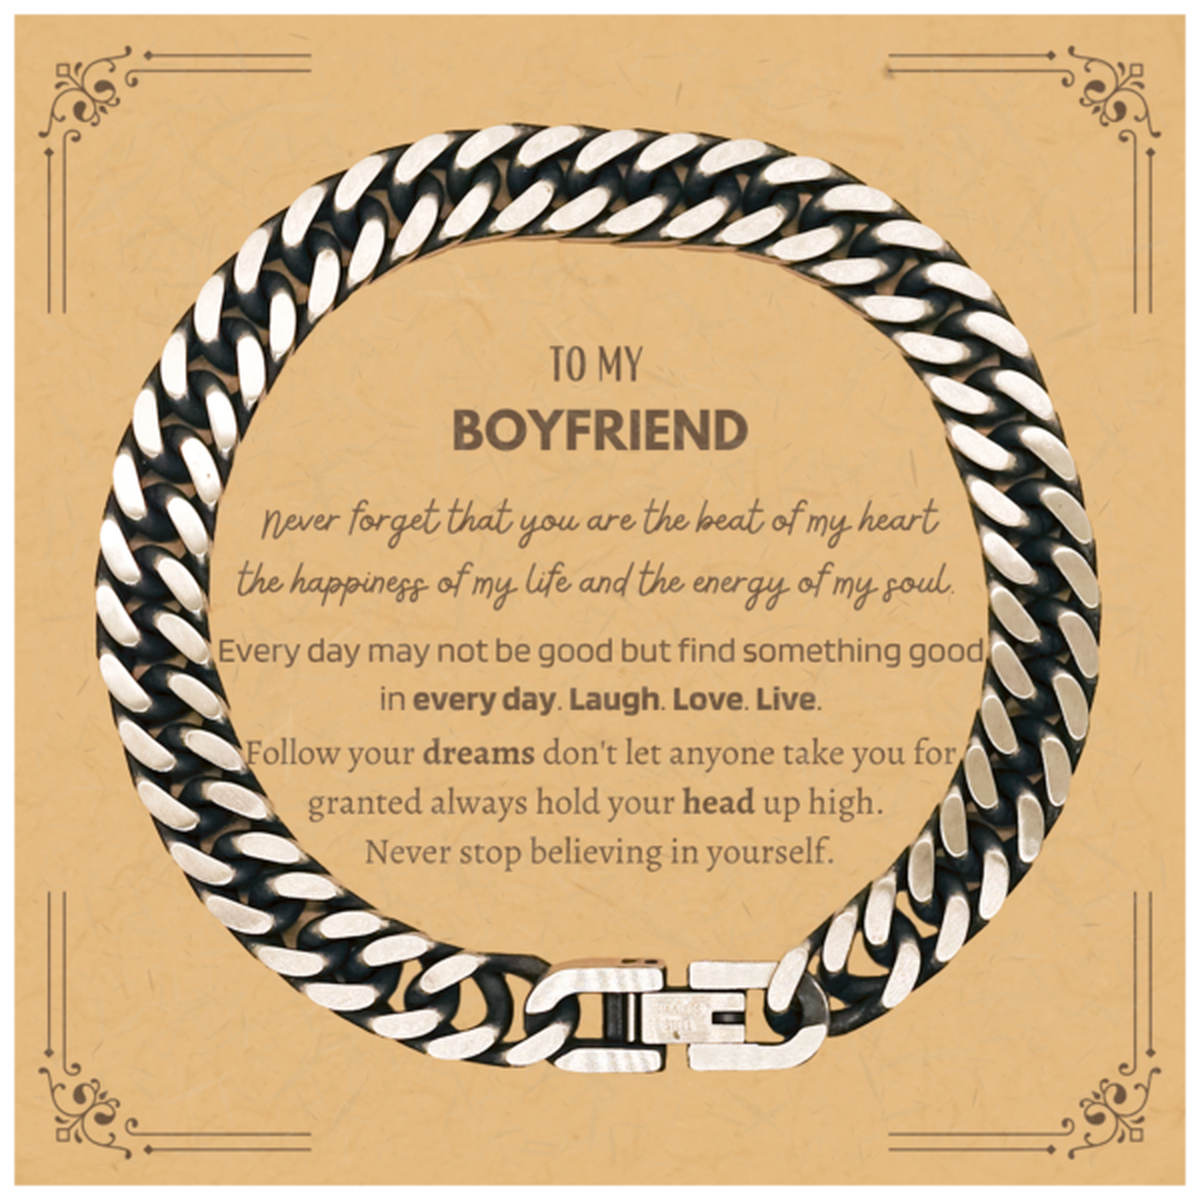 To My Boyfriend Message Card Gifts, Christmas Boyfriend Cuban Link Chain Bracelet Present, Birthday Unique Motivational For Boyfriend, To My Boyfriend Never forget that you are the beat of my heart the happiness of my life and the energy of my soul